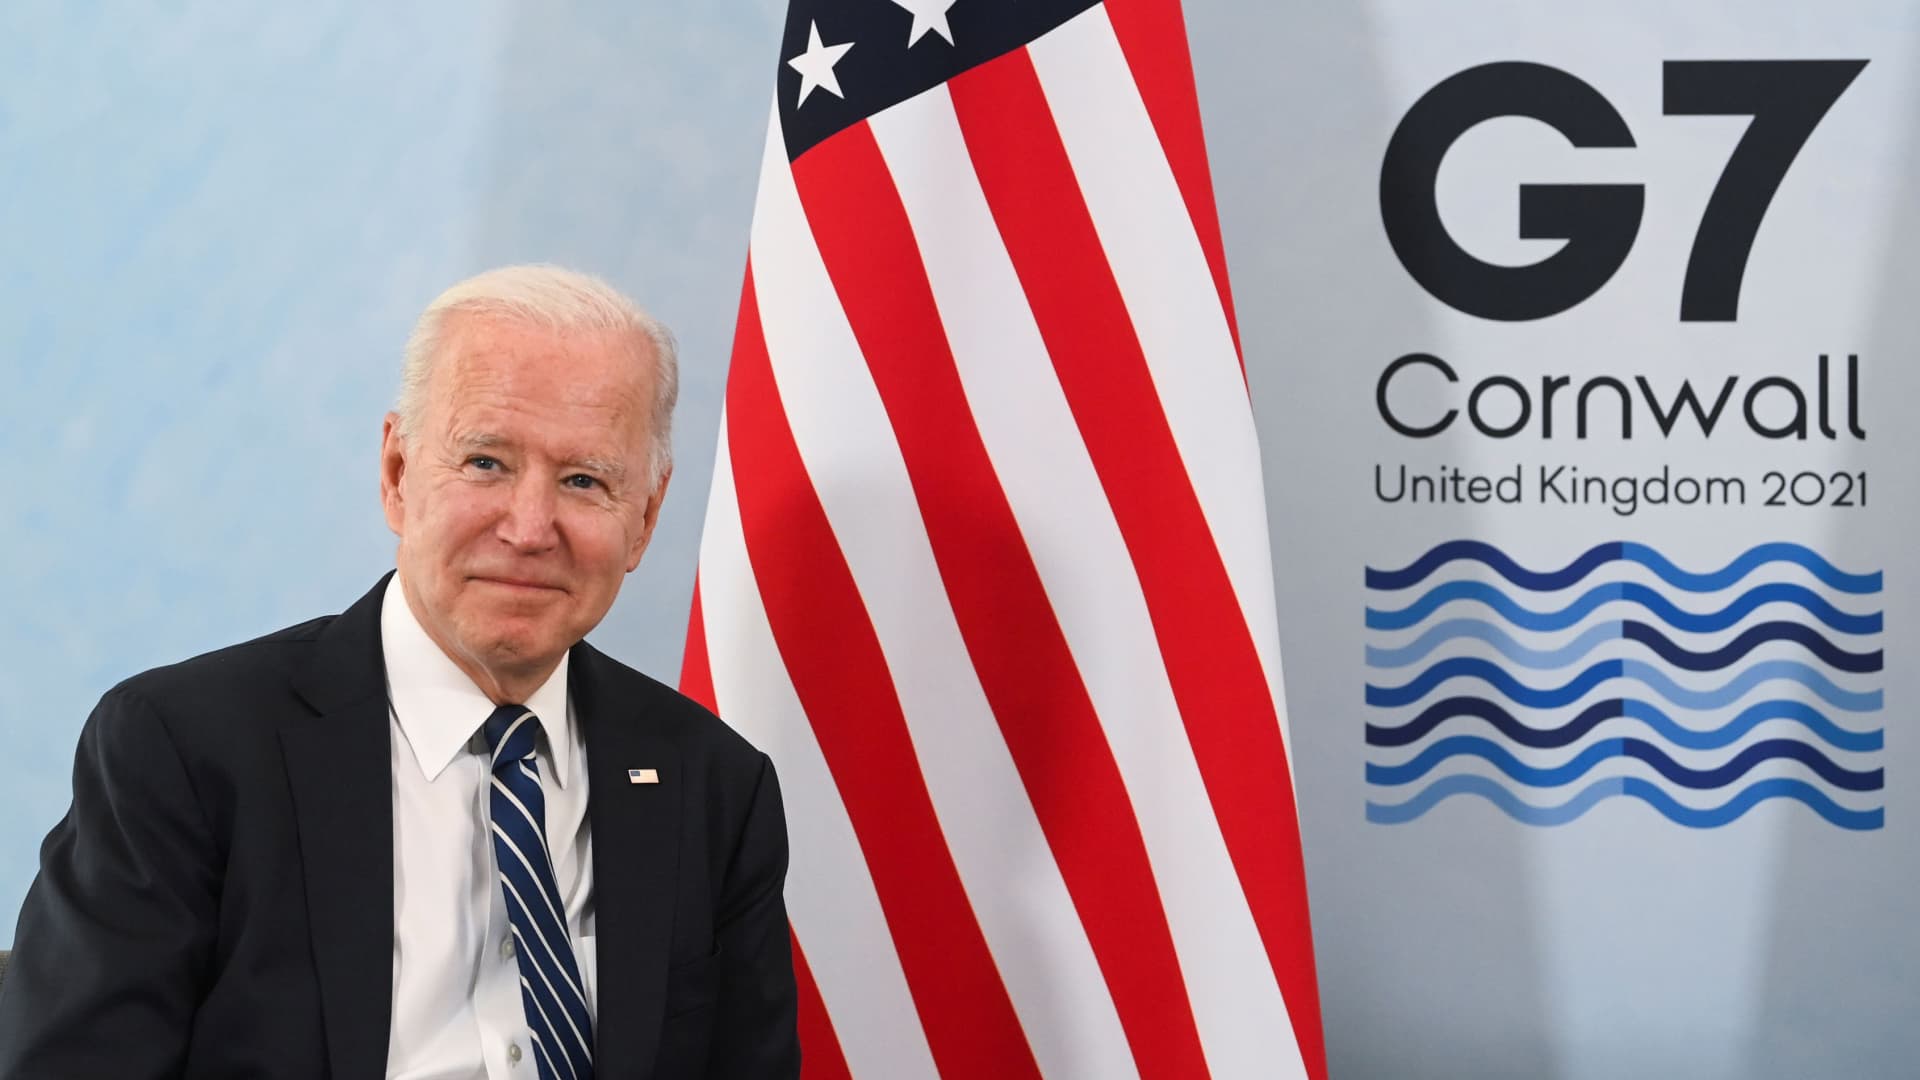 U.S. President Joe Biden poses for a picture during a meeting with Britain's Prime Minister Boris Johnson (not pictured) ahead of the G7 summit, at Carbis Bay, Cornwall, Britain June 10, 2021.